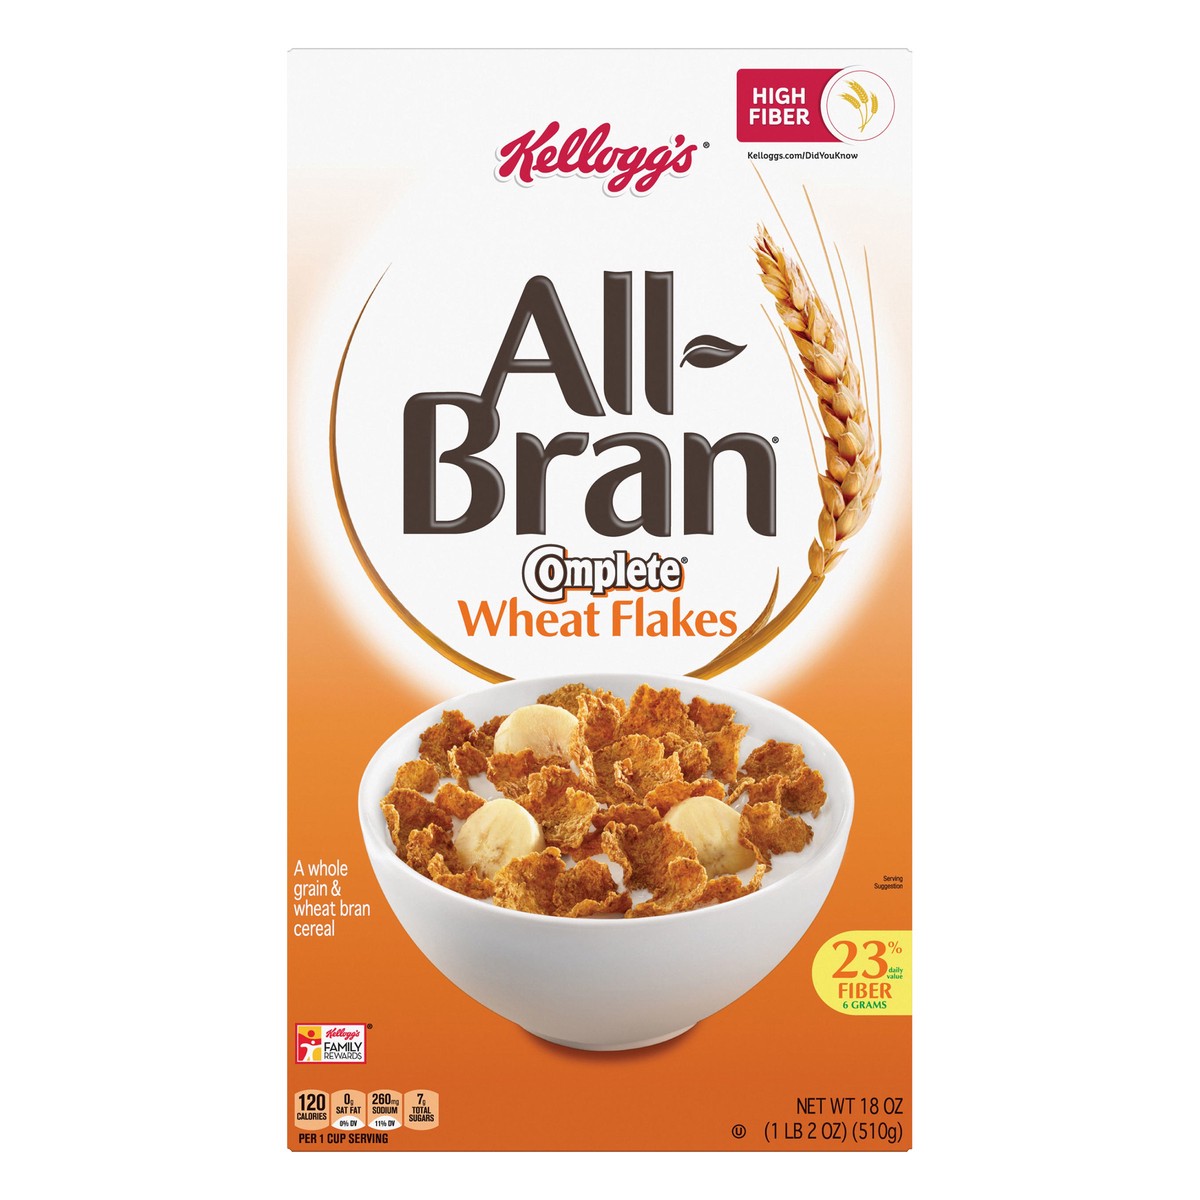 slide 1 of 7, All-Bran Kellogg's All Bran Breakfast Cereal, 8 Vitamins and Minerals, High Fiber Cereal, Complete Wheat Flakes, 18oz Box, 1 Box, 18 oz